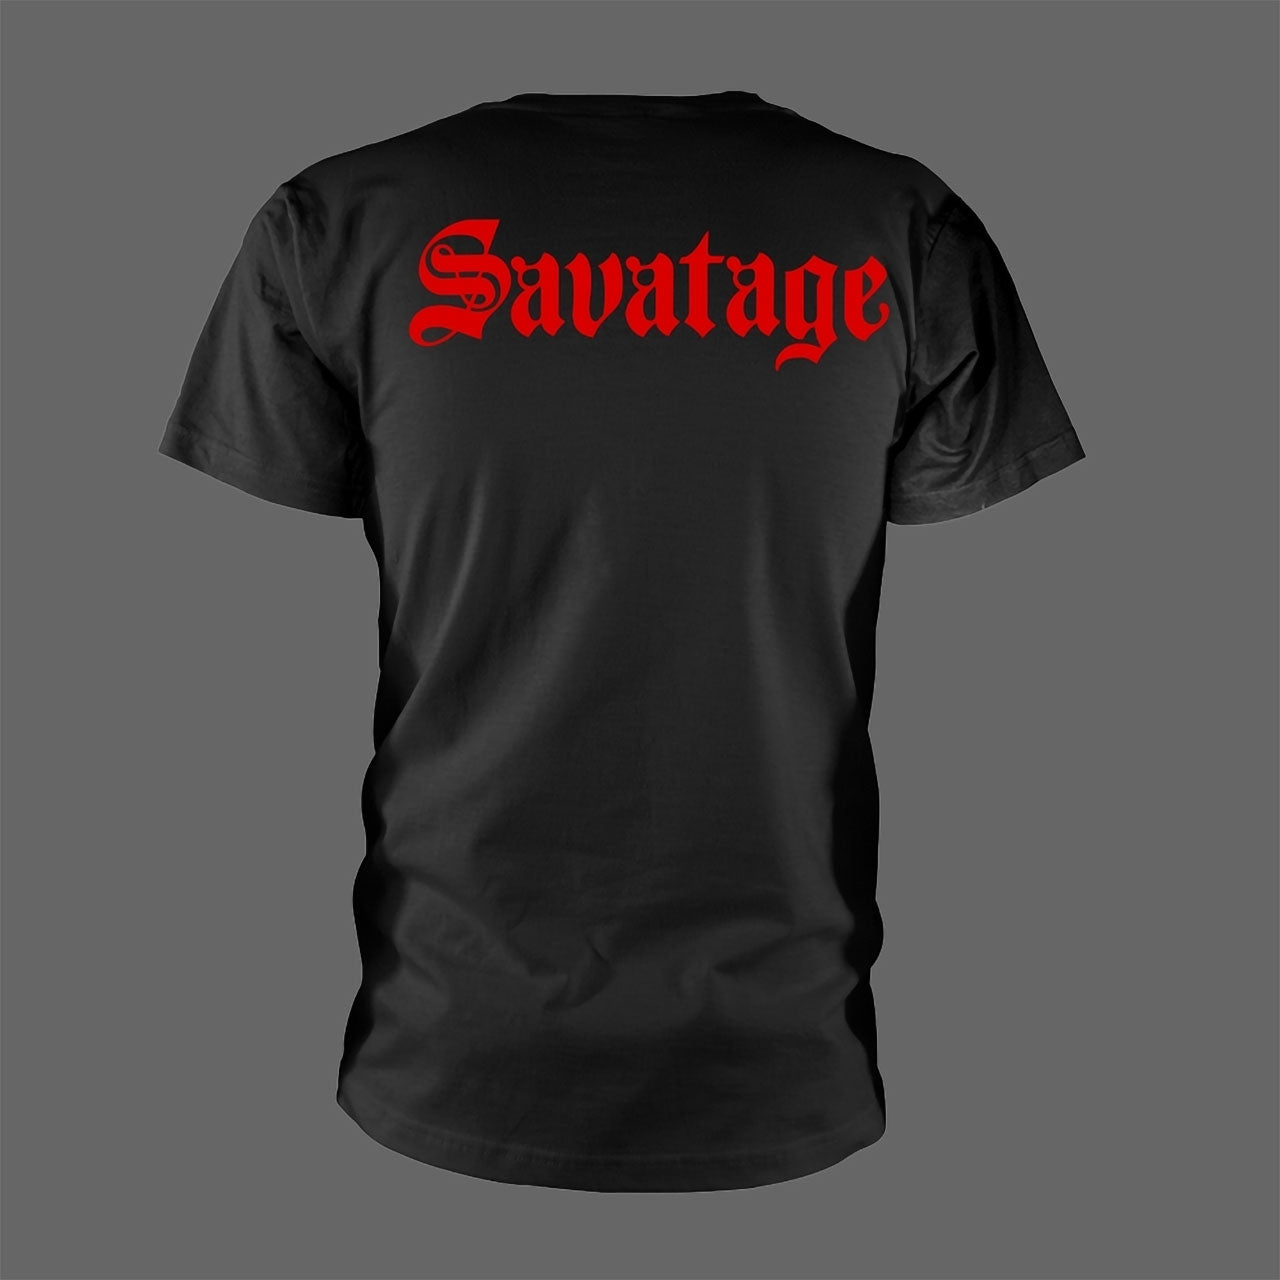 Savatage - The Dungeons are Calling (T-Shirt)